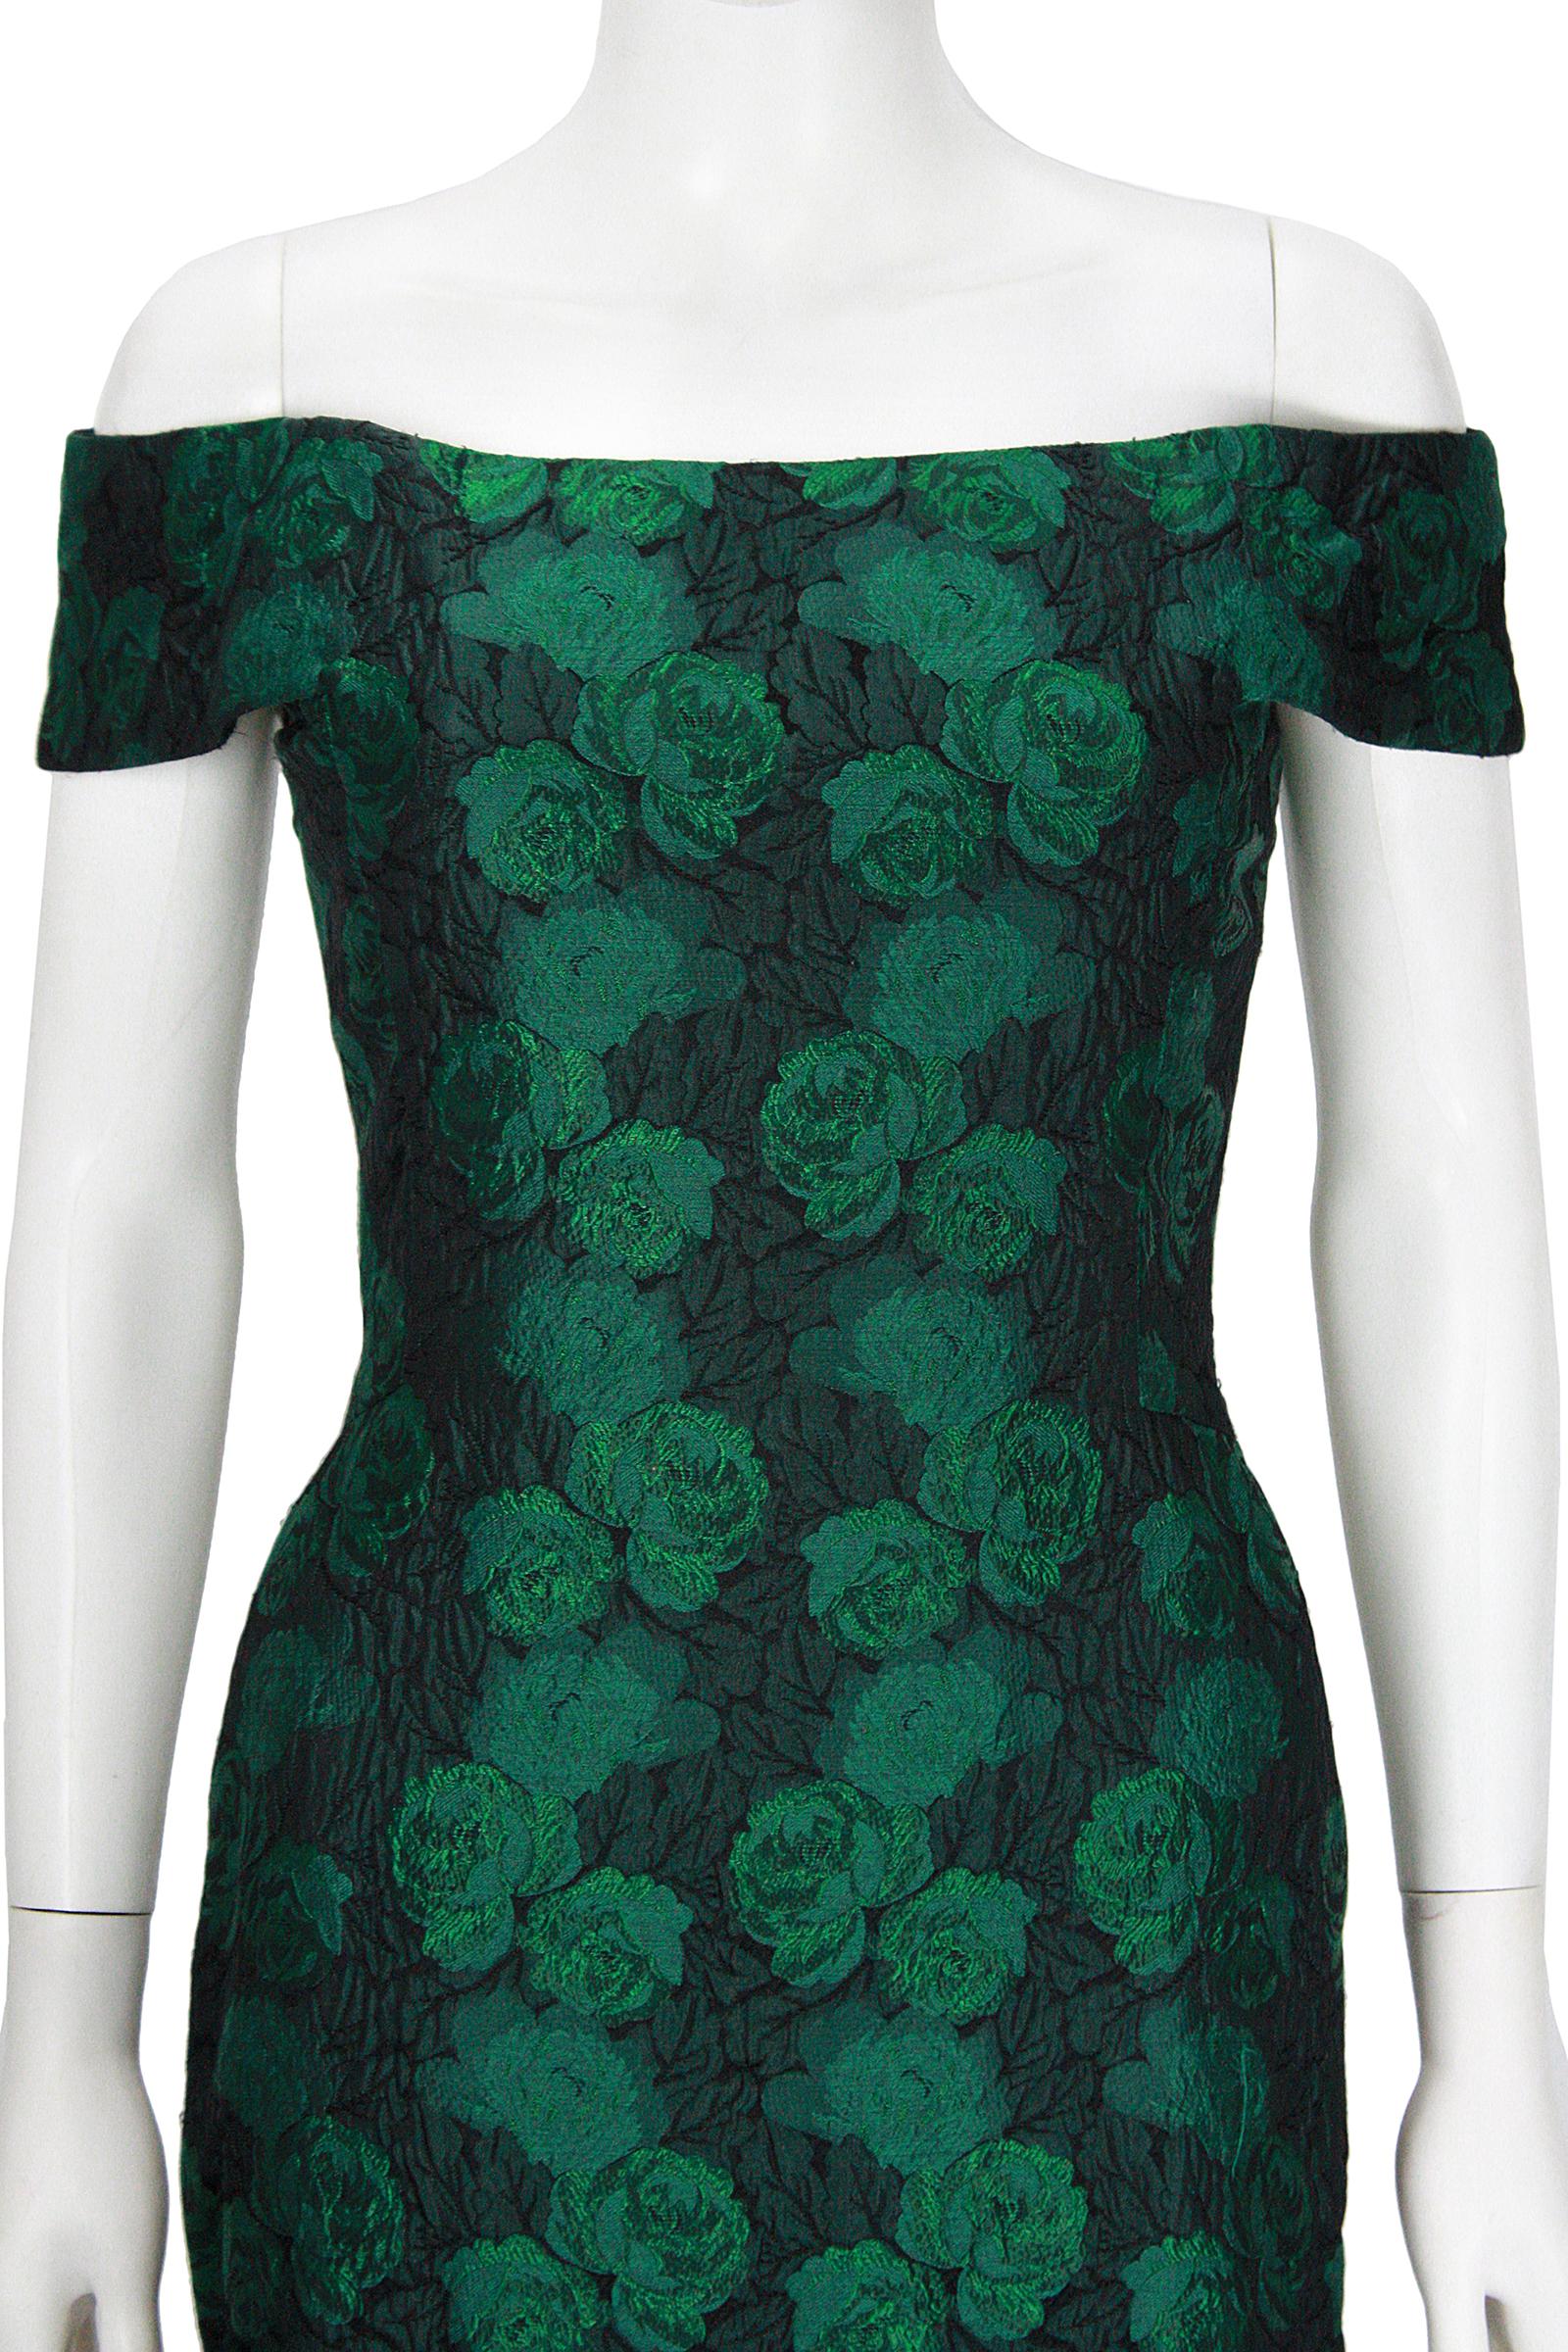 Women's 1980s Scaasi Off The Shoulder Green & Black Floral Brocade Gown with Jacket For Sale